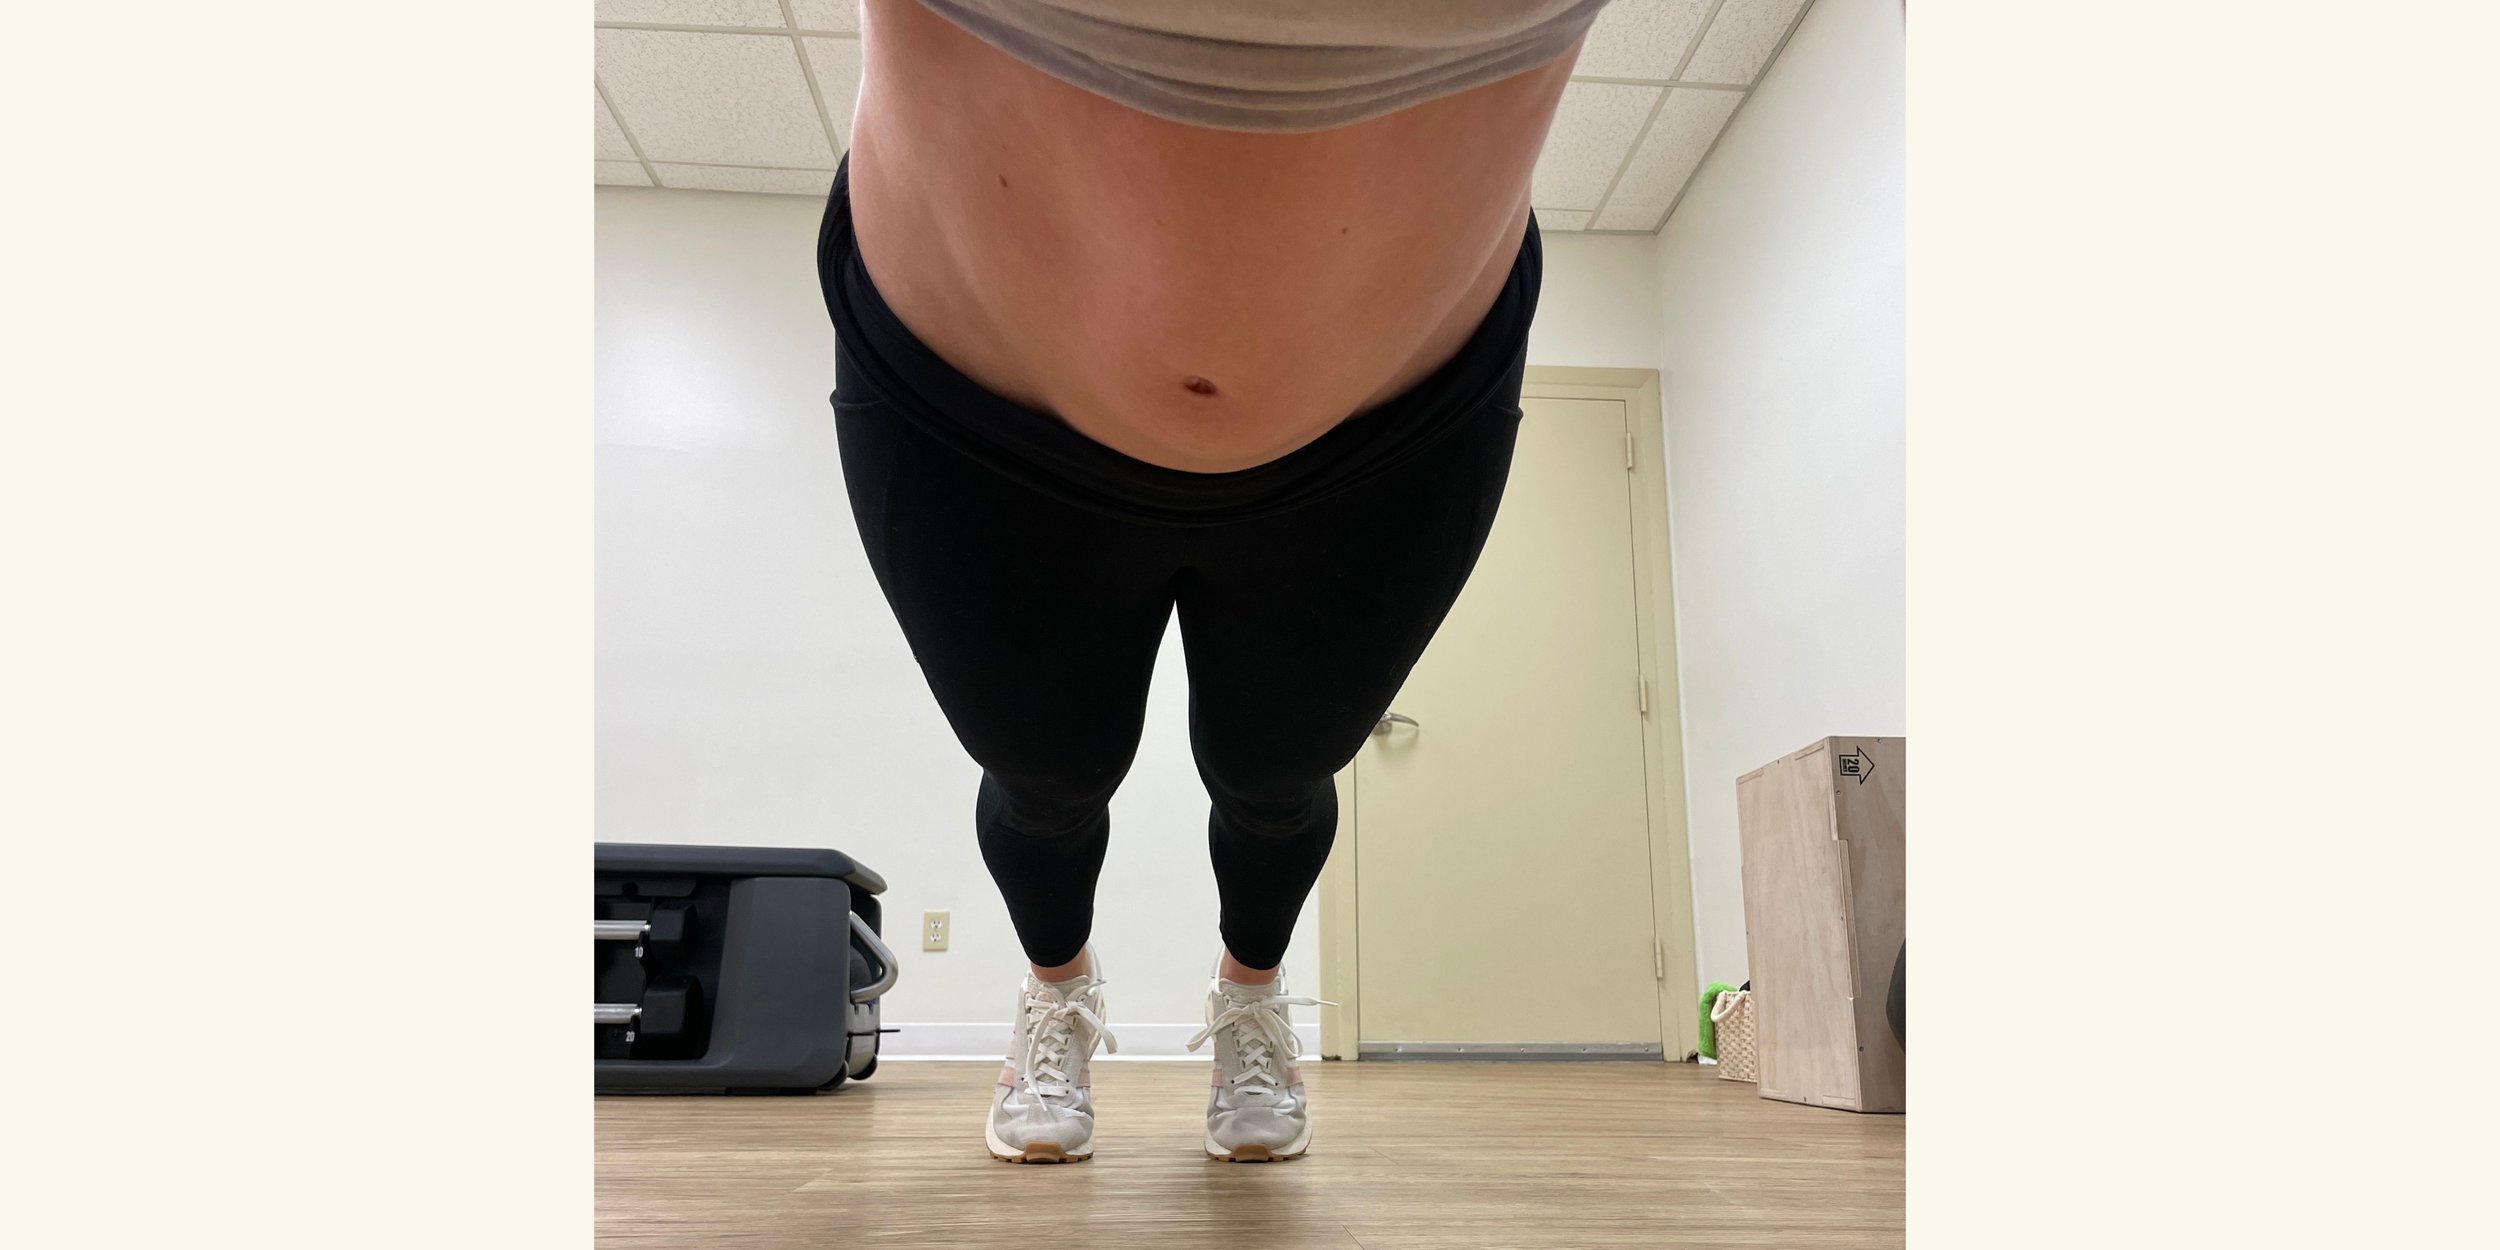 Diastasis recti, does a doming stomach mean you should stop the exercise?  - Healthy Post Natal Body